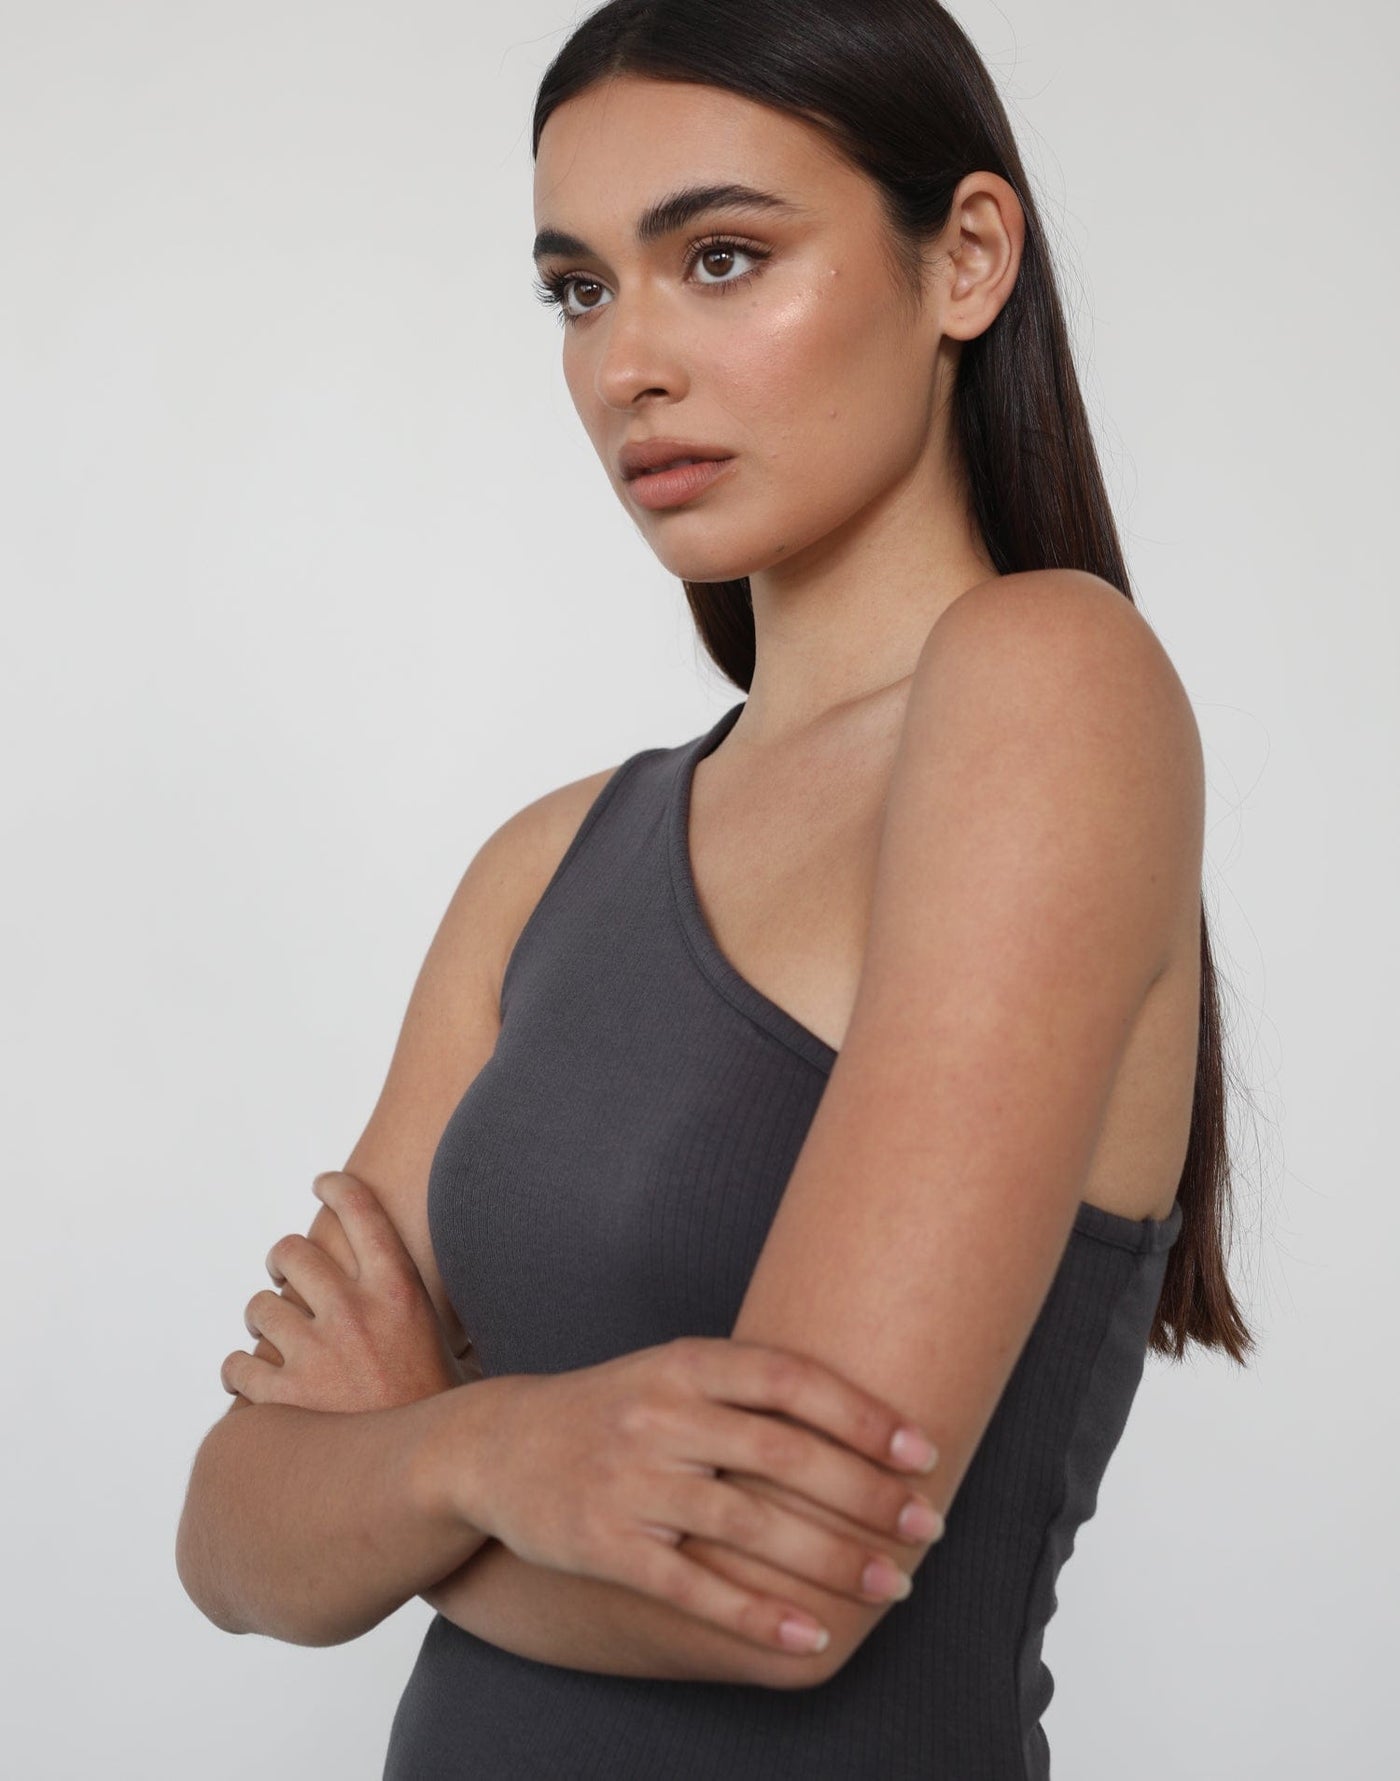 Allison Top (Charcoal) - One Shoulder Charcoal Grey Top - Women's Tops - Charcoal Clothing